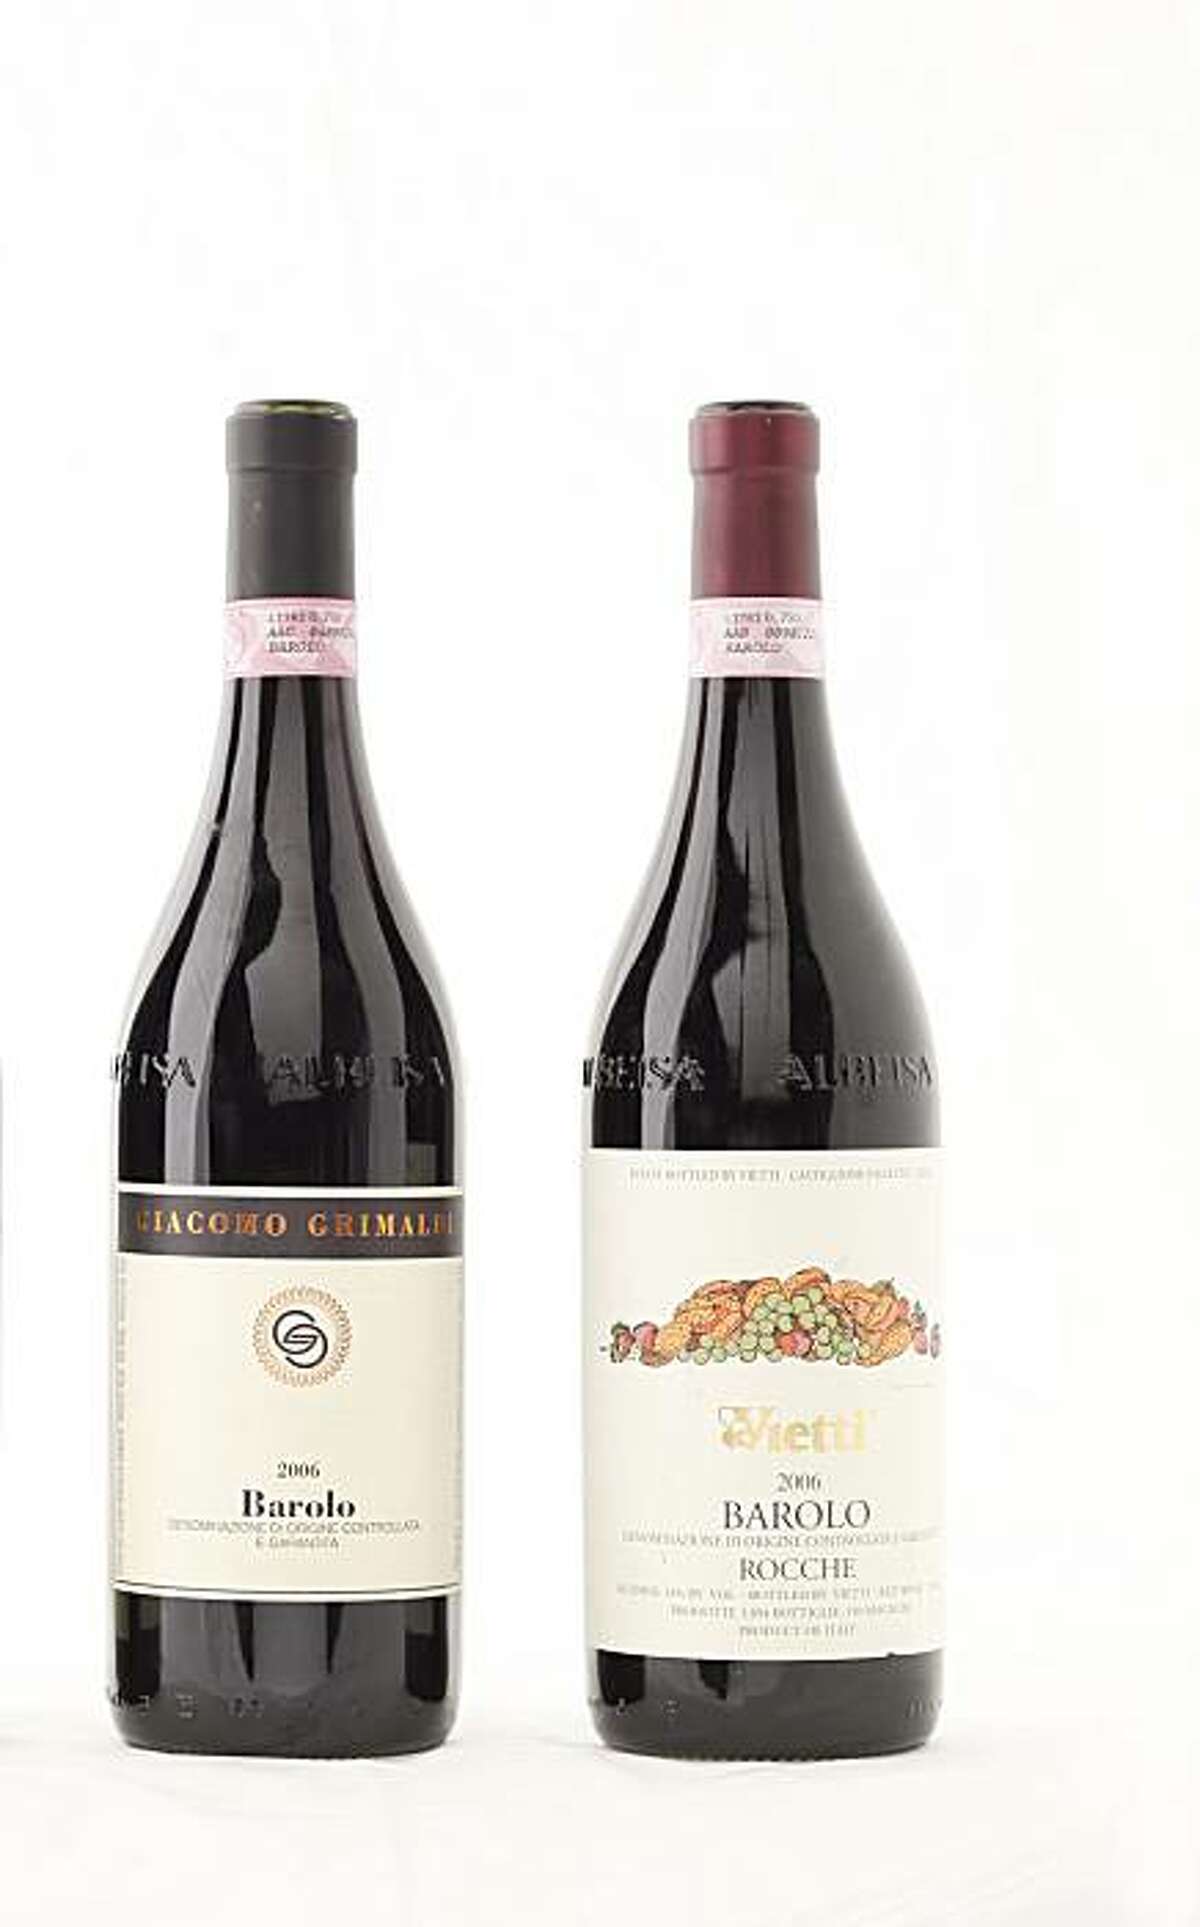 Left-right: 2006 Giacomo Grimaldi Barolo, 2006 Vietti Barolo as seen in San Francisco, Calif., on December 21, 2010. MANDATORY CREDIT FOR PHOTOG AND SF CHRONICLE/NO SALES-MAGS OUT-INTERNET OUT-TV OUT